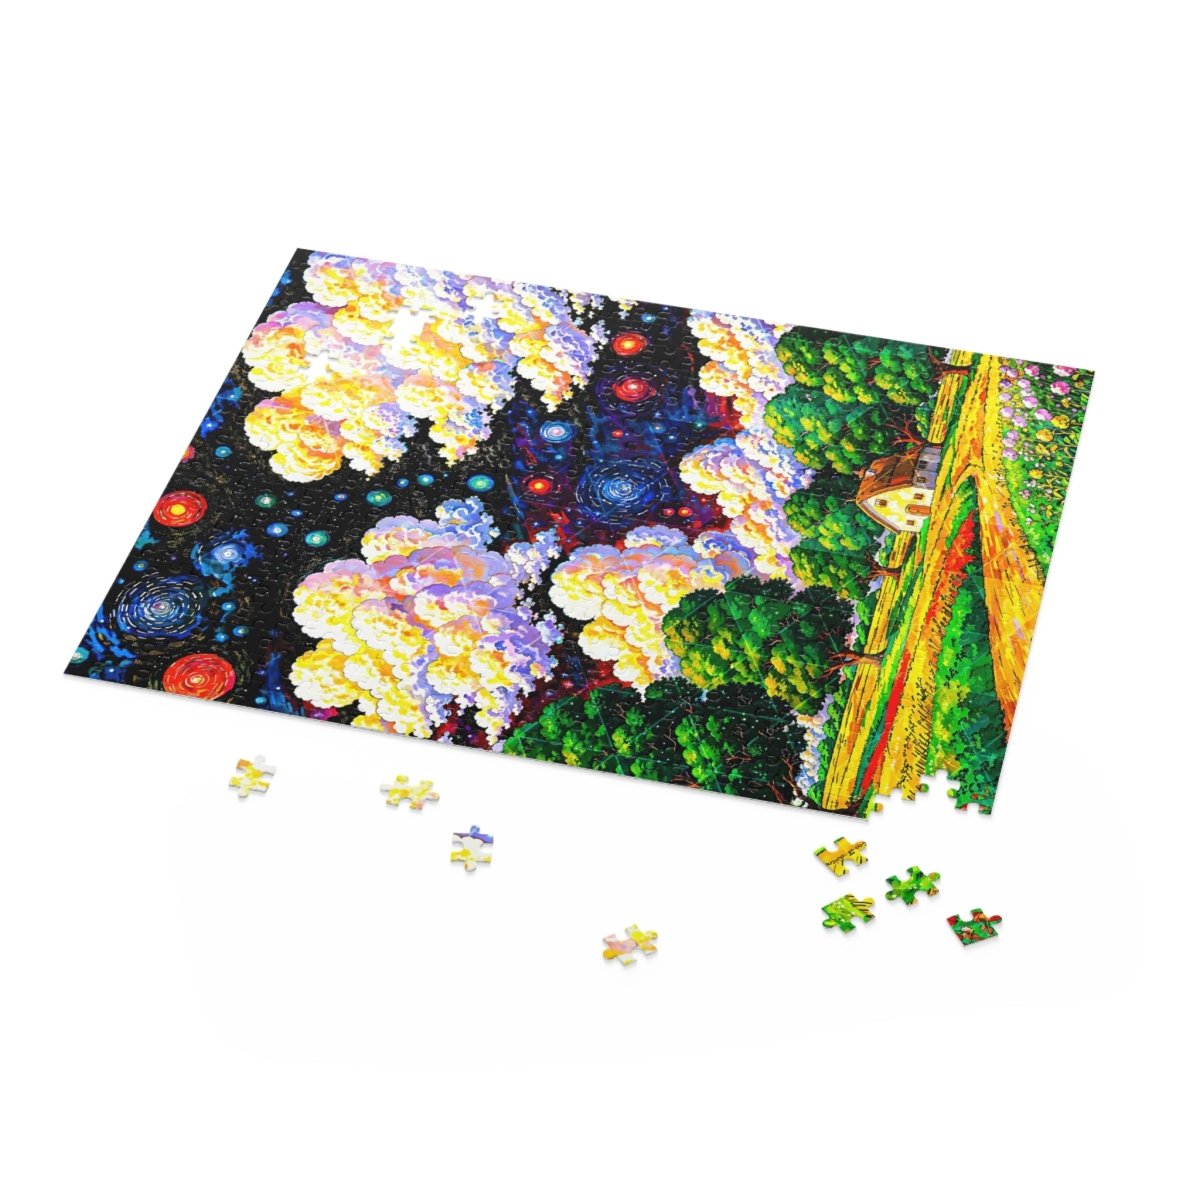 Celestial cluster - Puzzle - Puzzle - Ever colorful